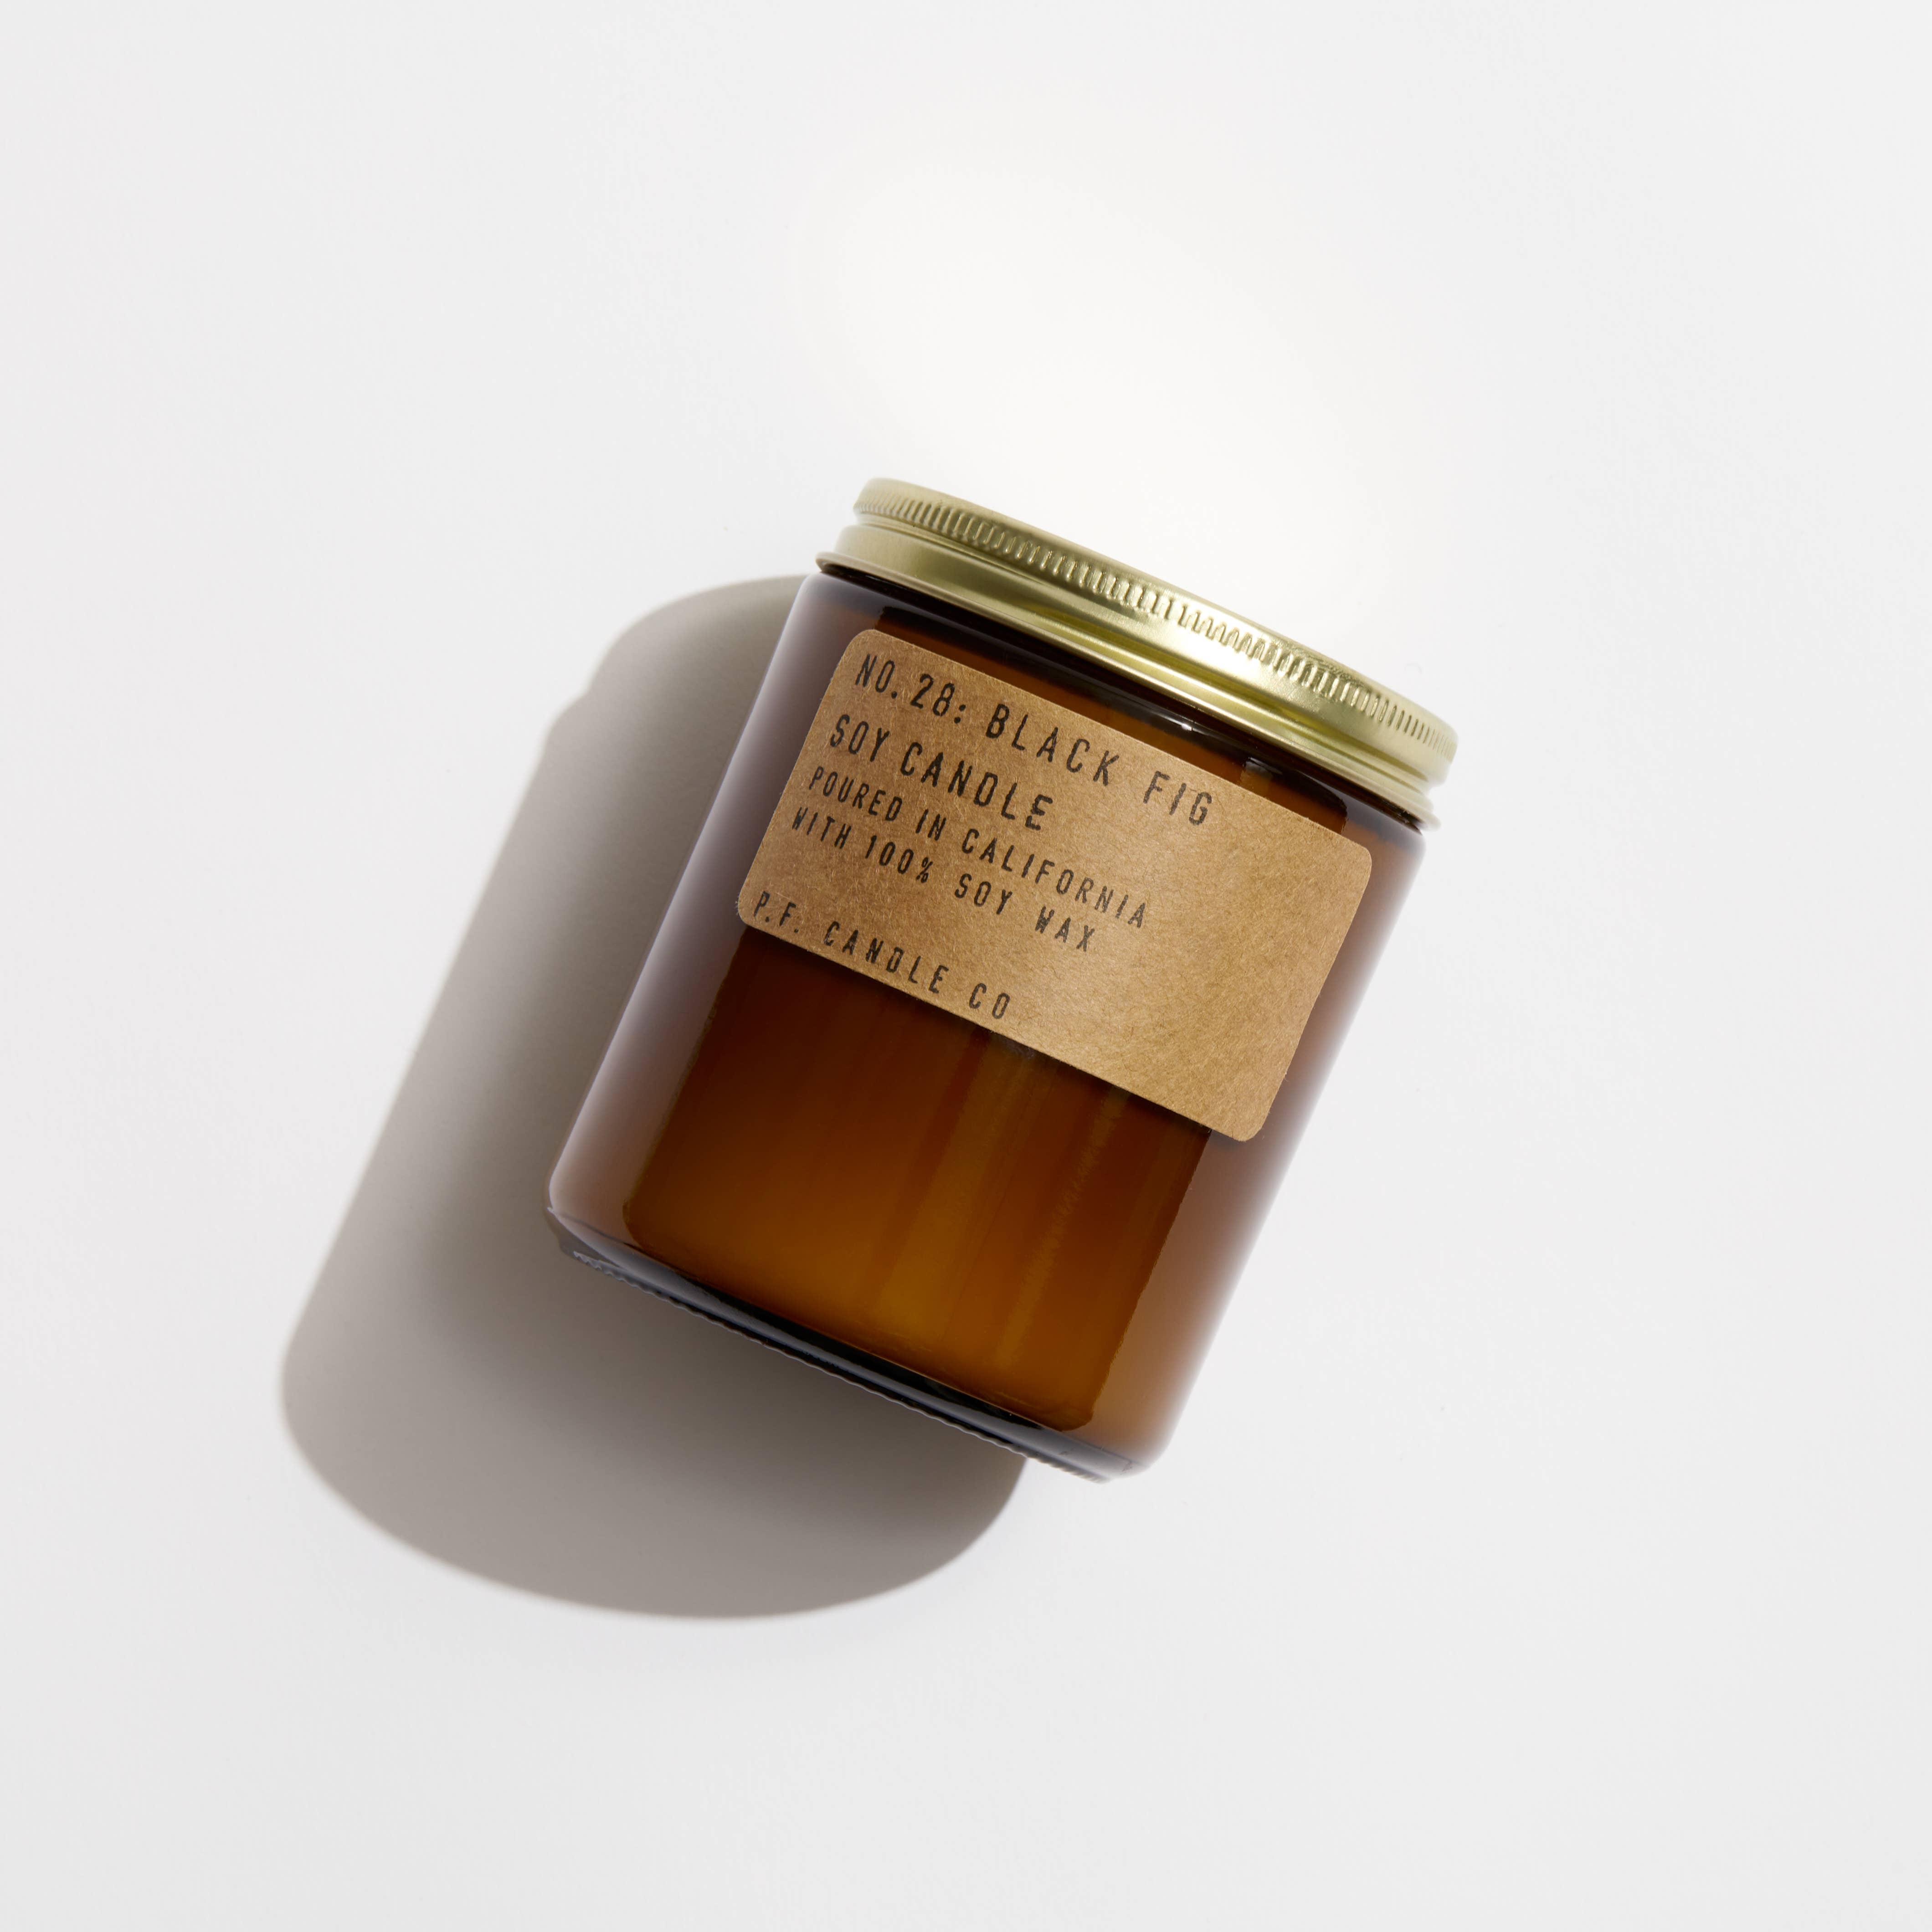 P.F. Candle Co. Standard Soy Candle - Black Fig